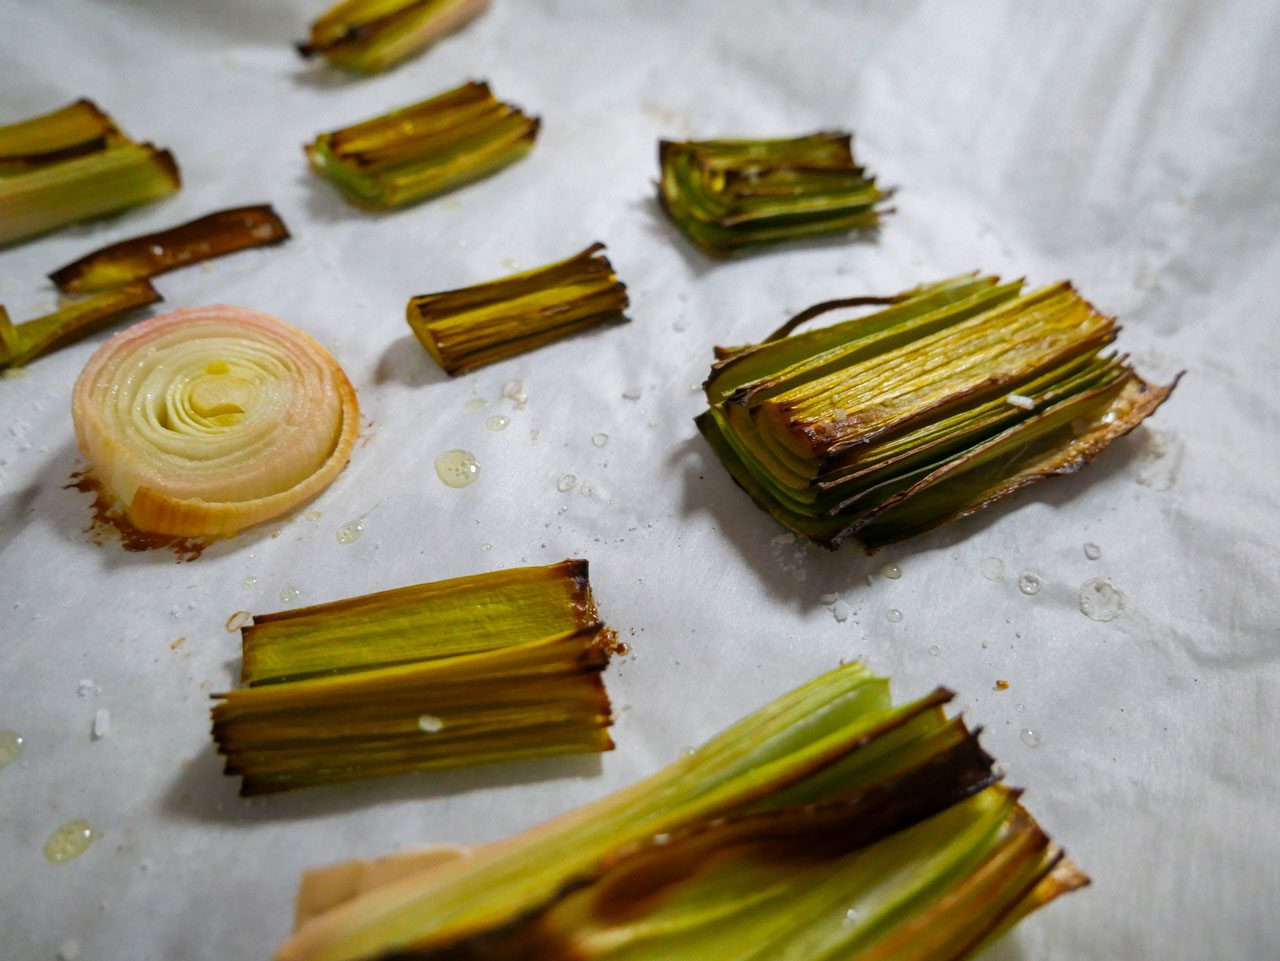 Cooked leeks for leek and bacon compound butter and dip